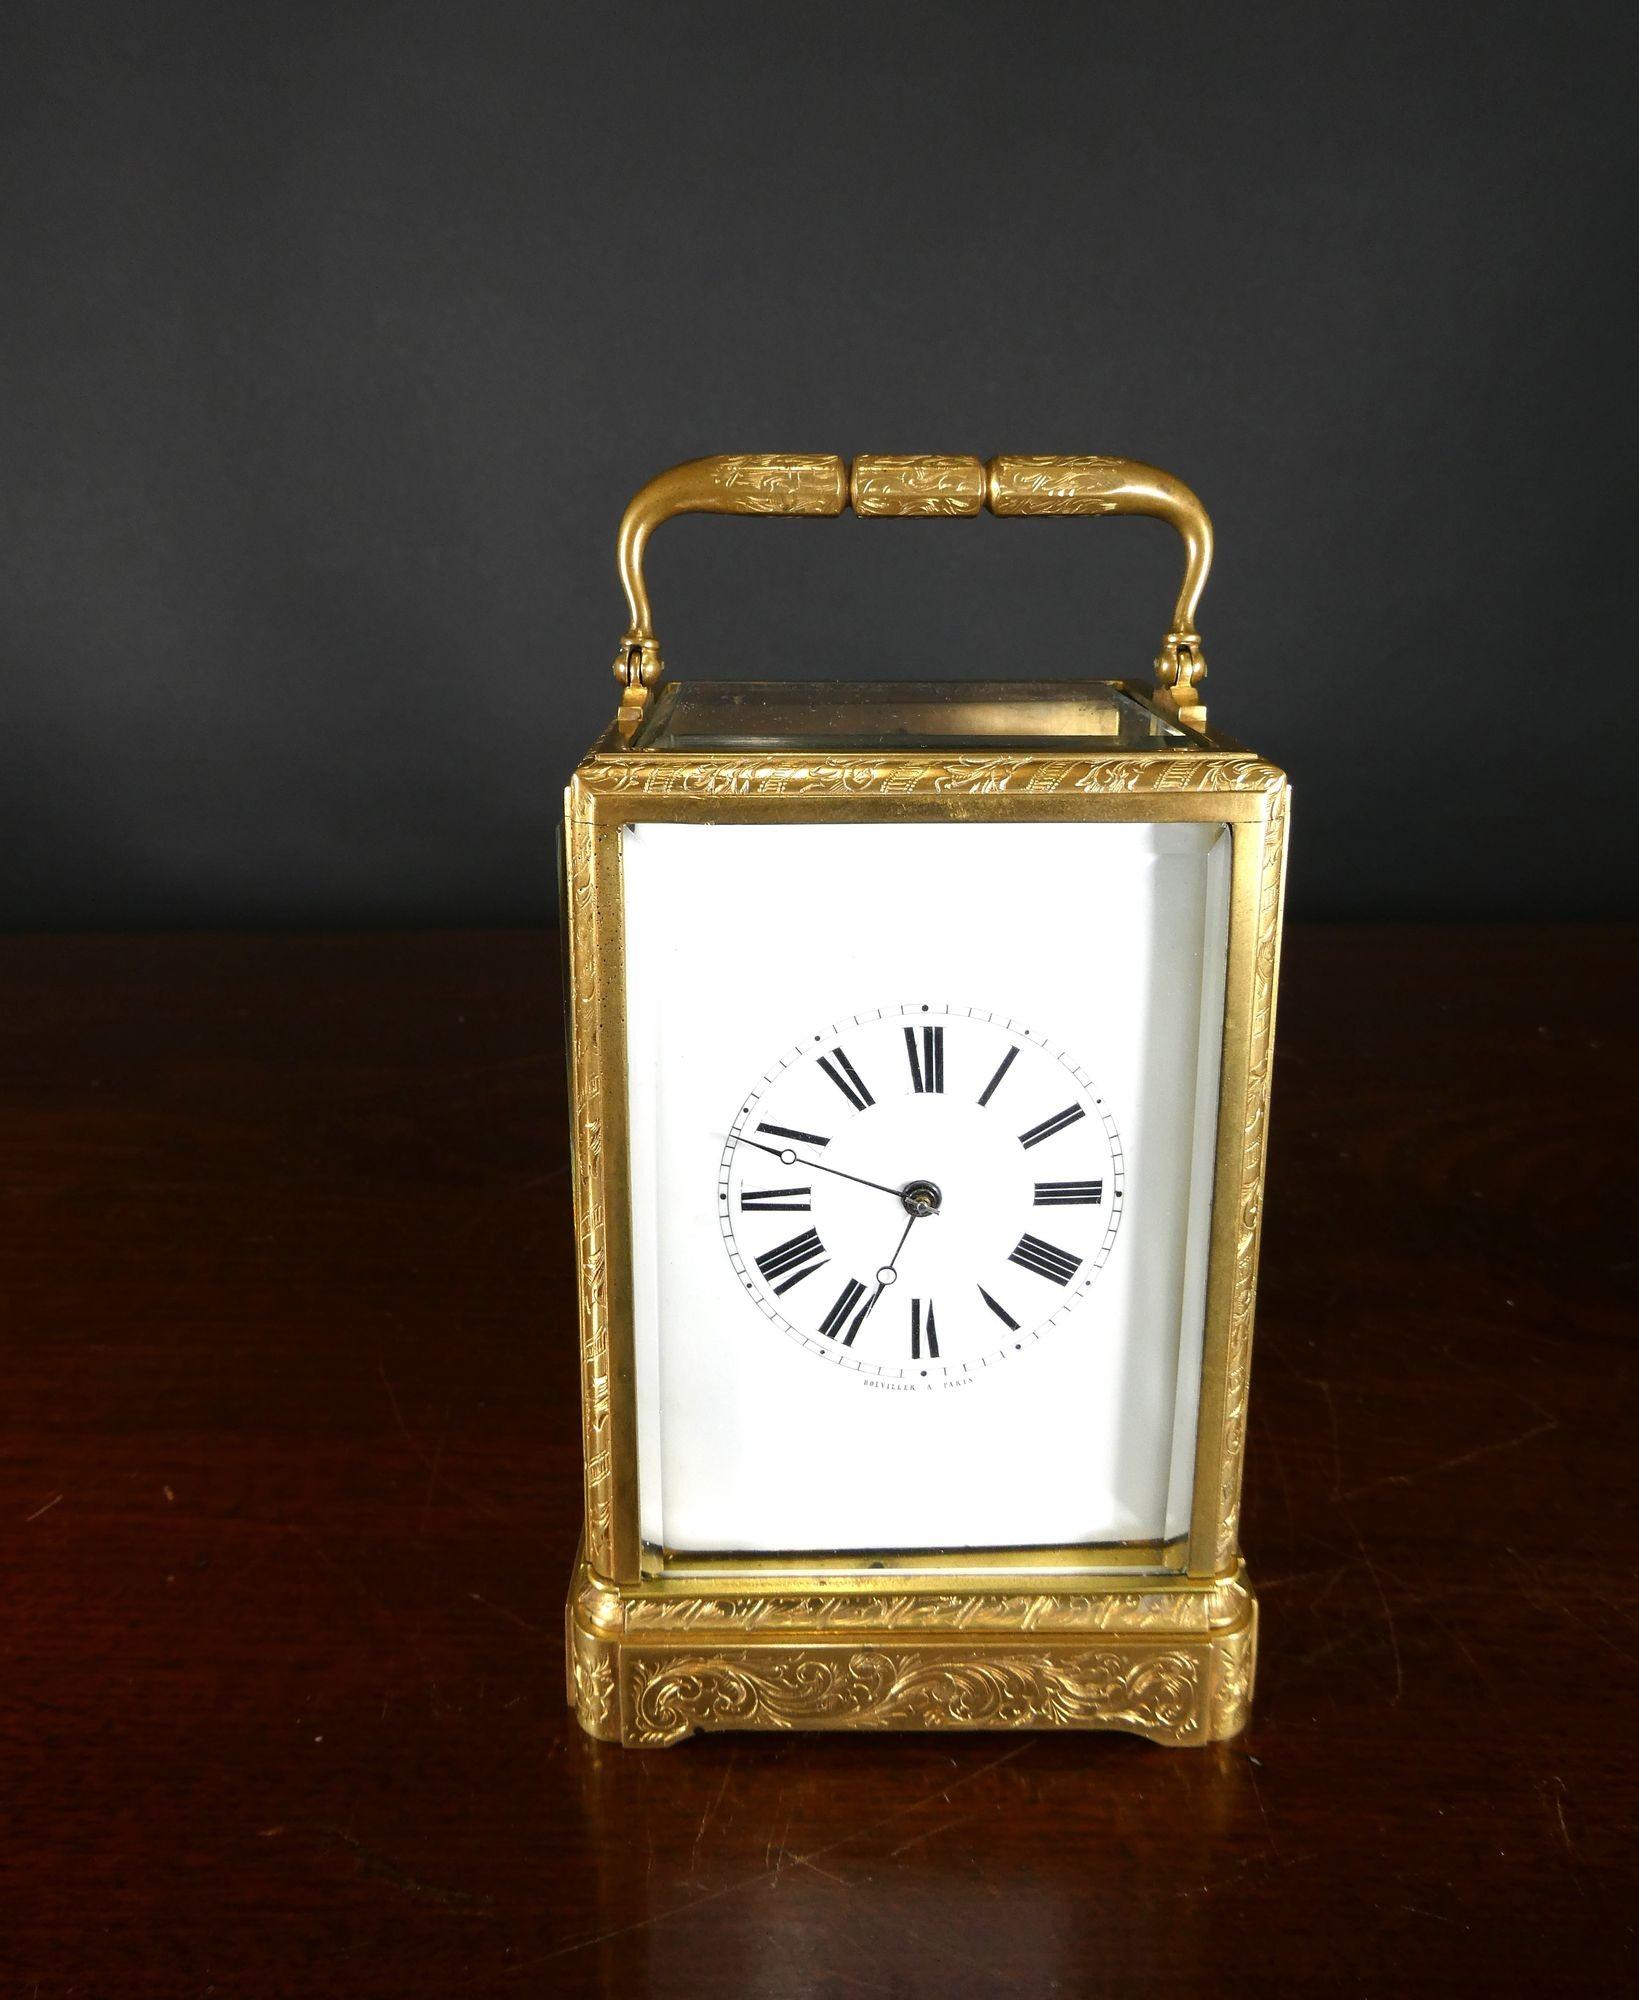 French gilded brass carriage clock in a finely engraved case with bevelled glass.

The rear of the case with conforming engraving to the rear door incorporating shutters for the winding and hand setting squares
Enamel dial with Roman numerals and